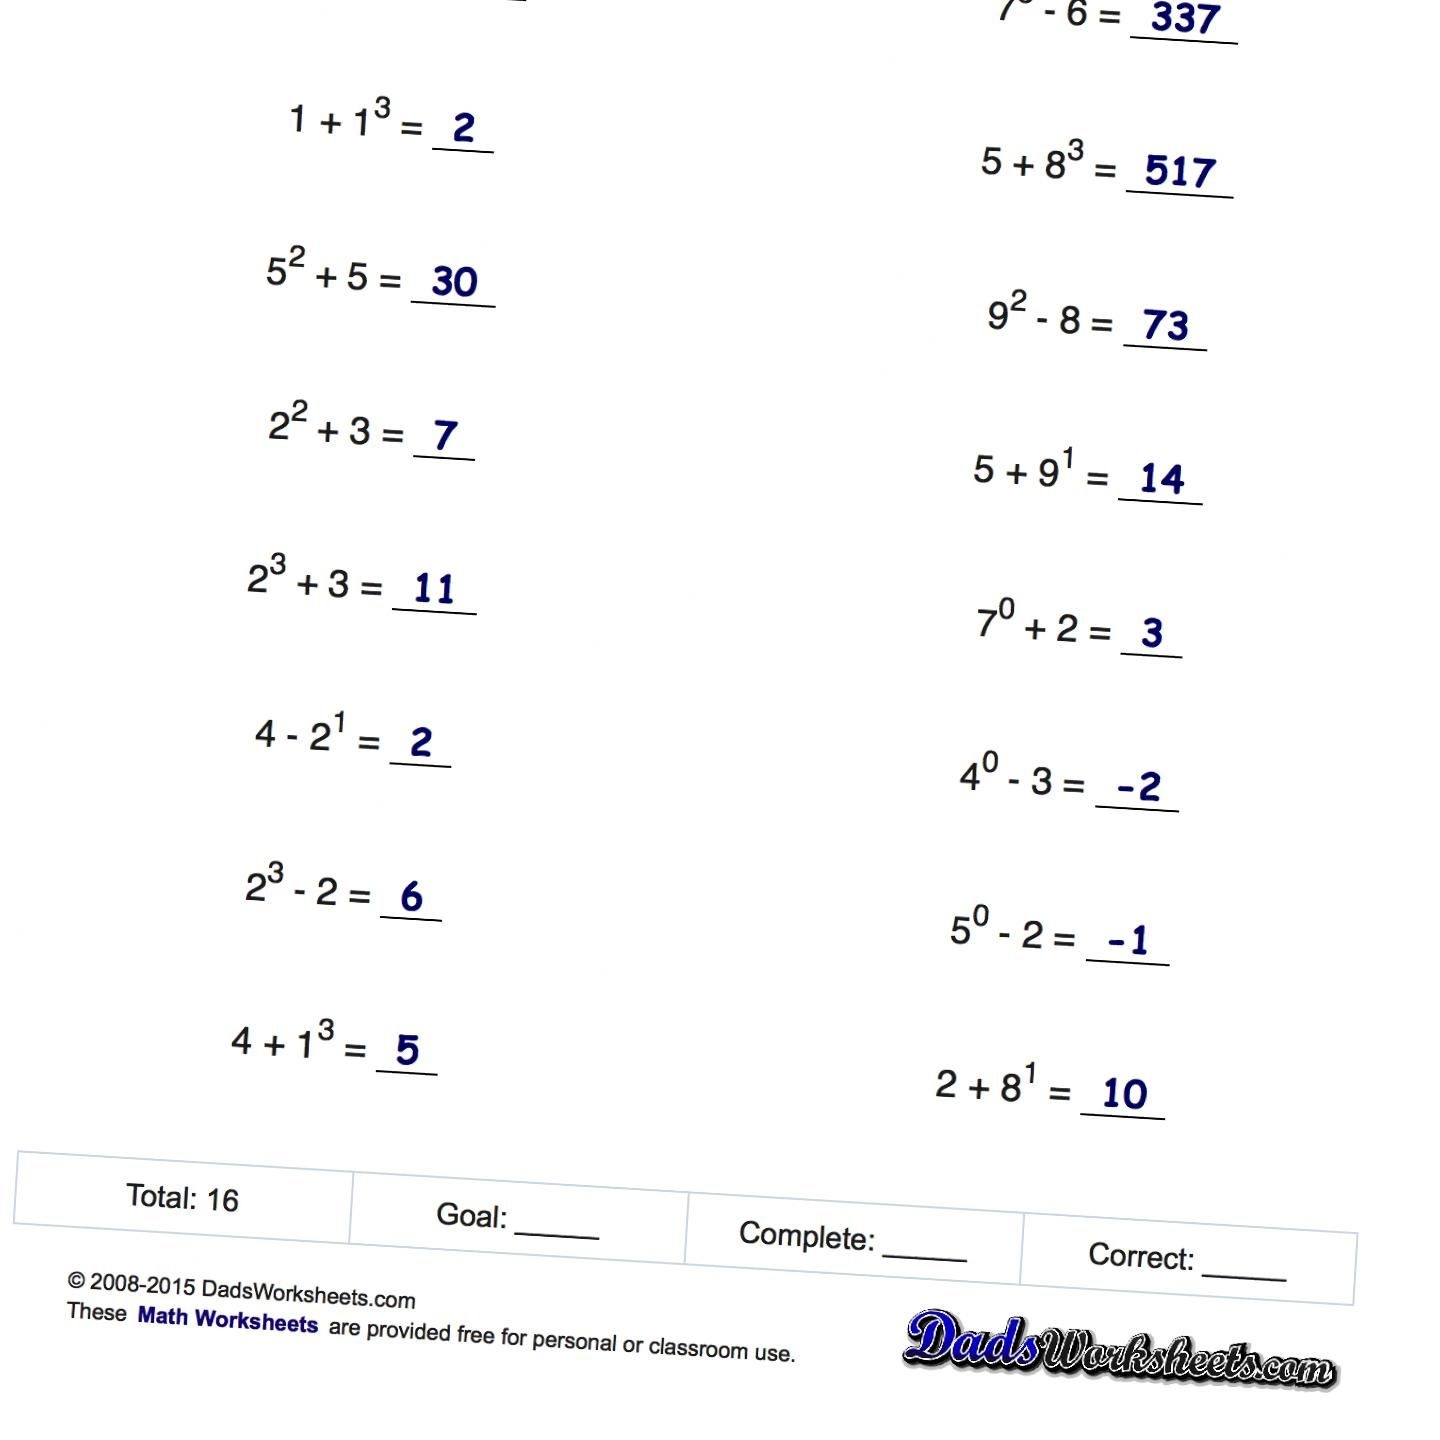 Exponents Worksheets! Mixed Addition And Subtraction With Exponents - Free Printable Mixed Addition And Subtraction Worksheets